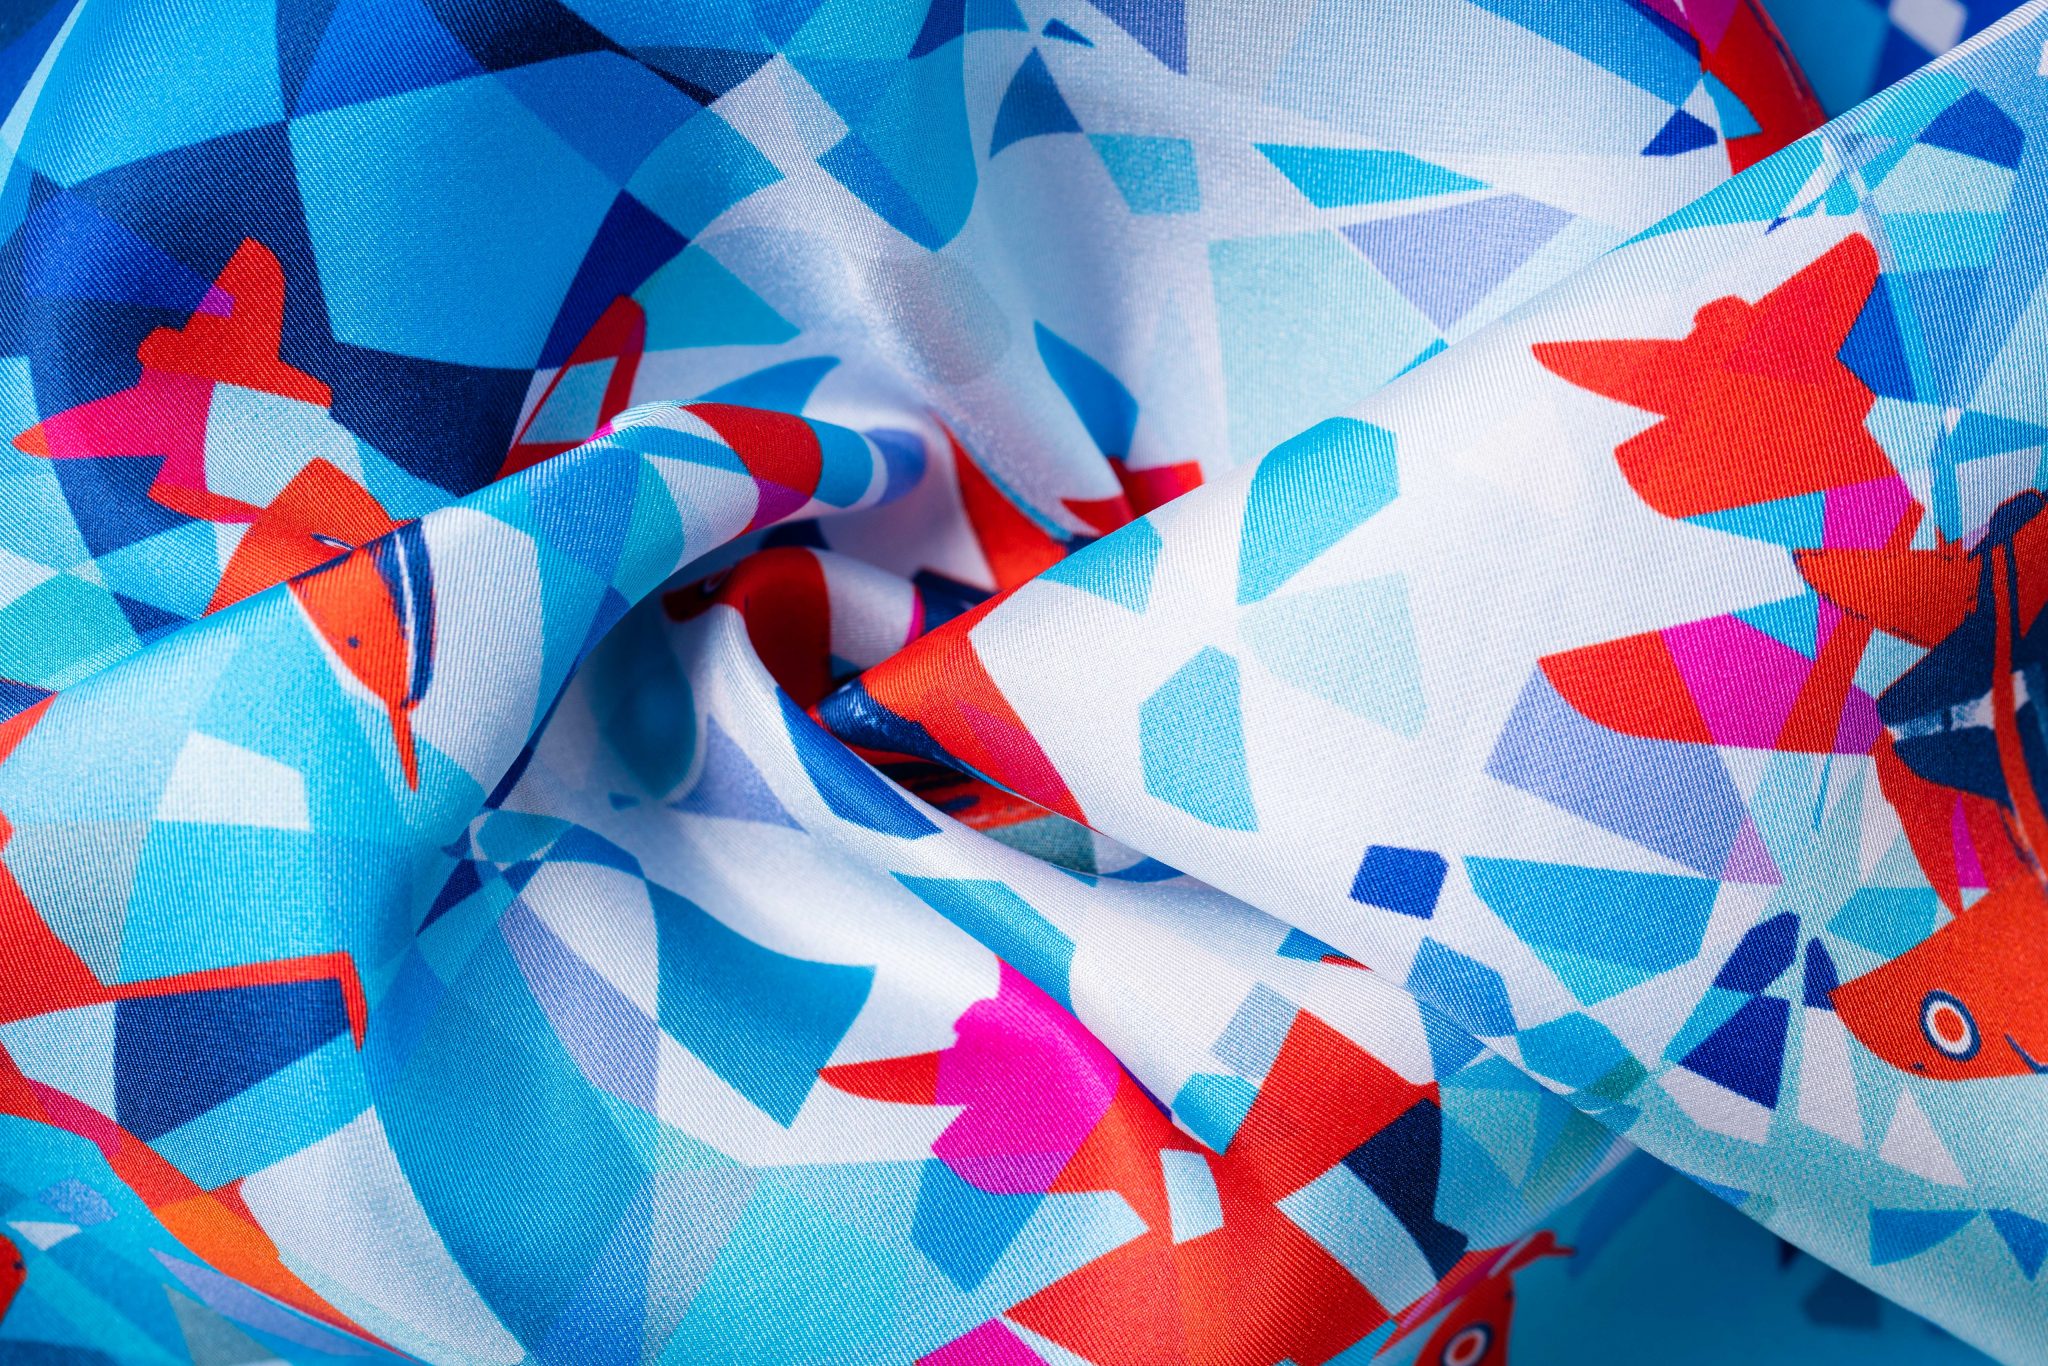 Commercial photo of colourful patterned fabric